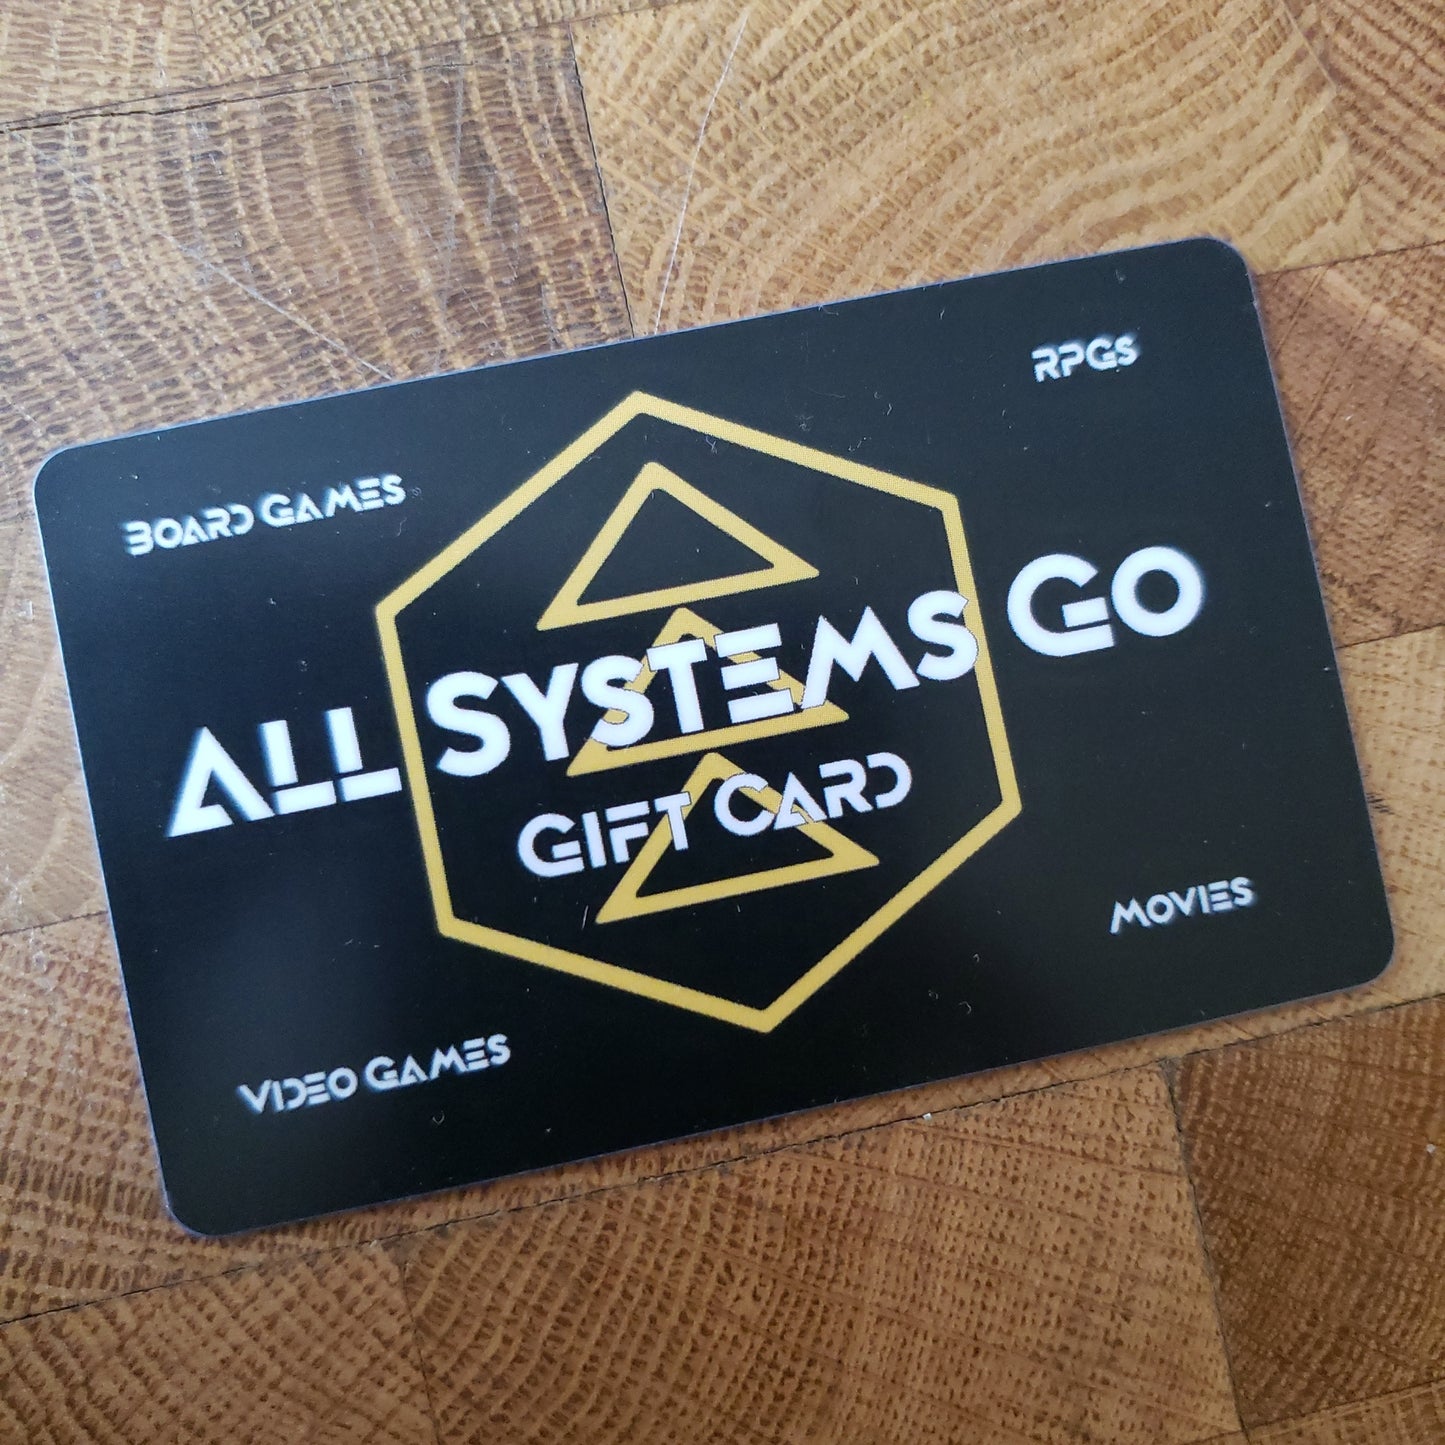 Image shows a gift card for All Systems Go with the store's logo behind the text